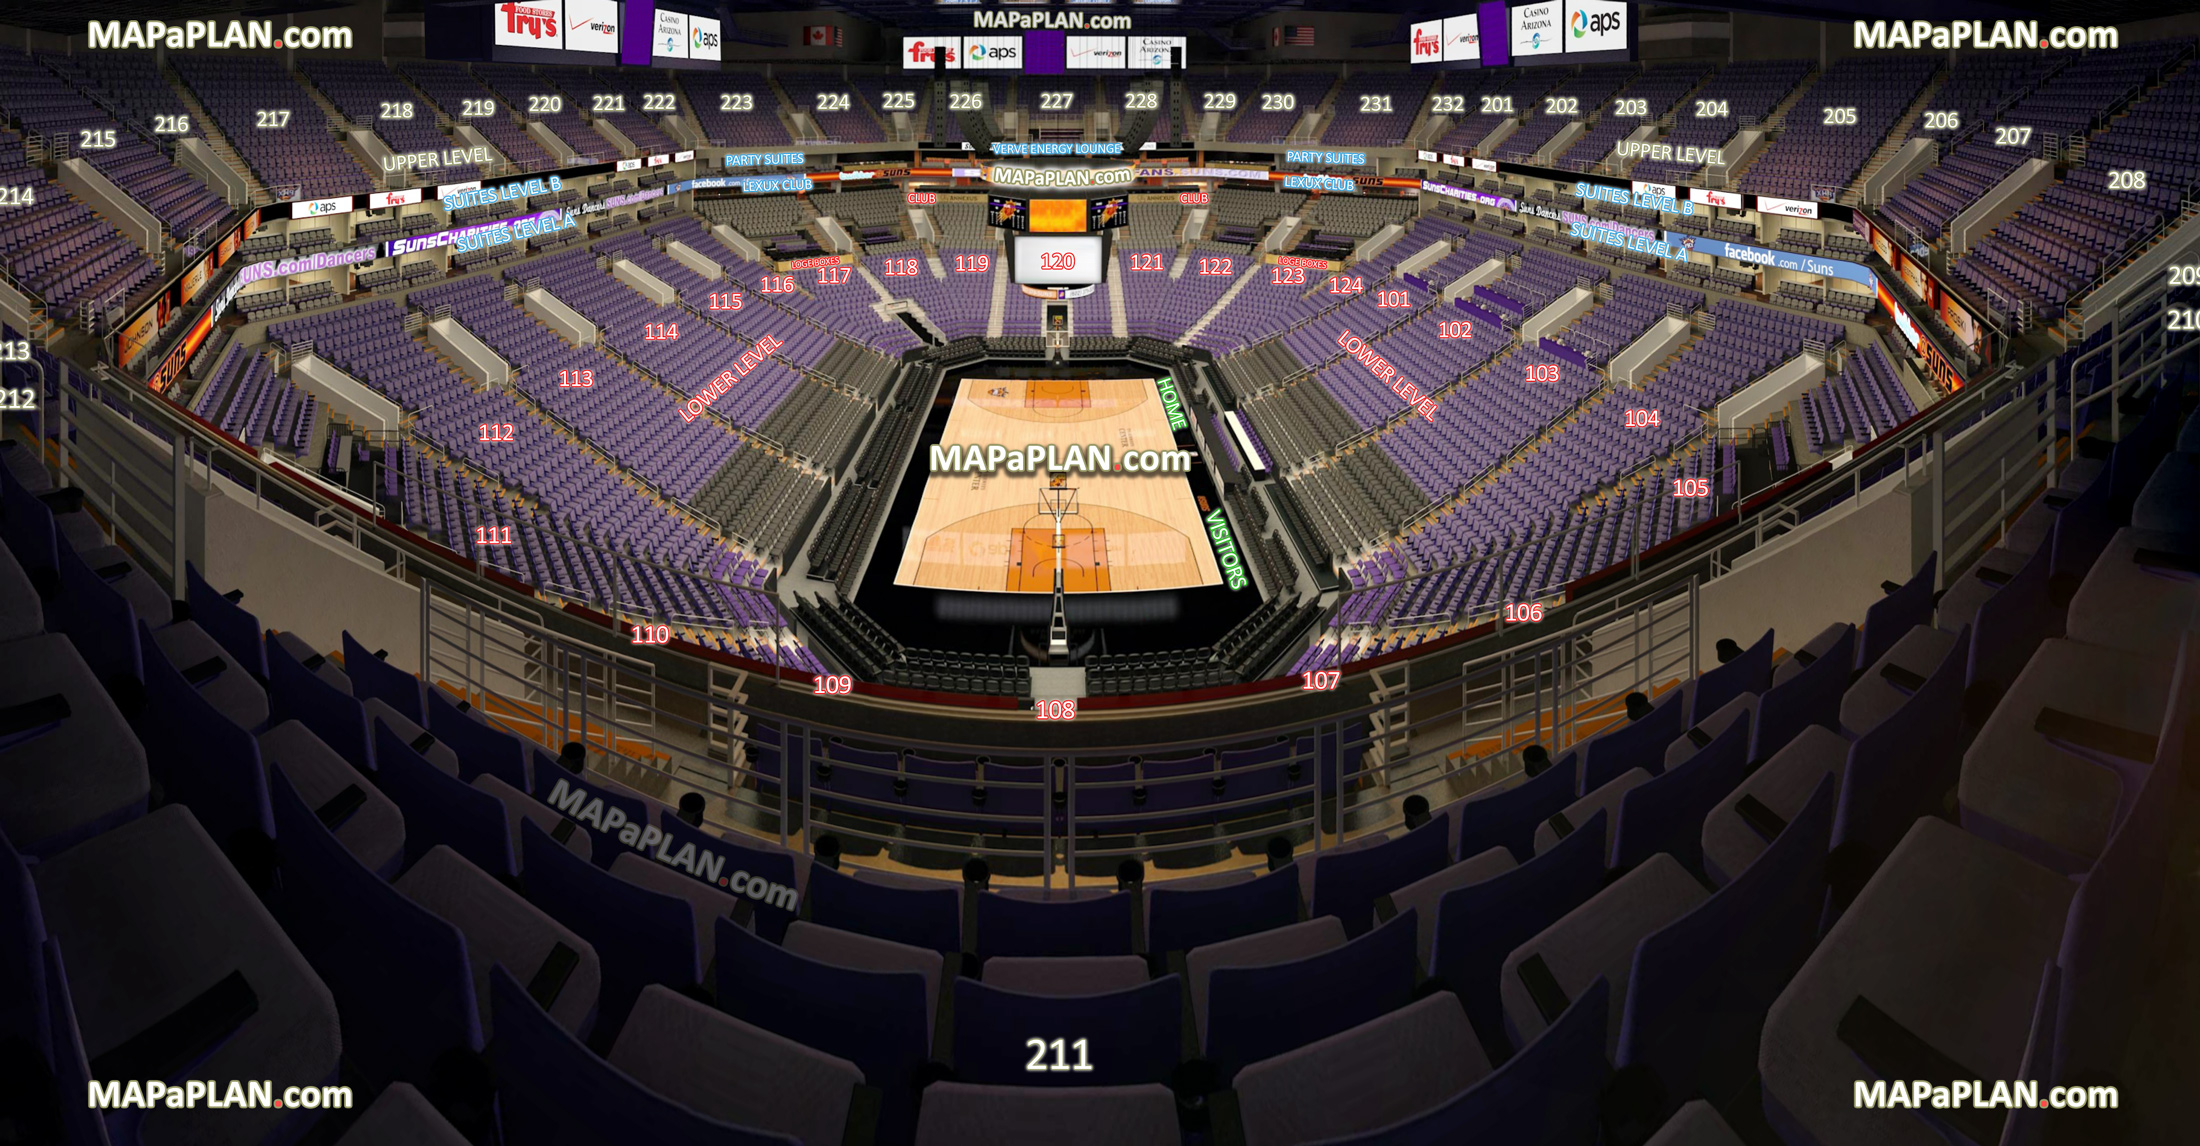 view section 211 row 10 seat 8 suns mercury wnba ncaa college basketball tournament home visitors bench court sideline baseline corner courtside club end Phoenix Footprint Center Arena seating chart